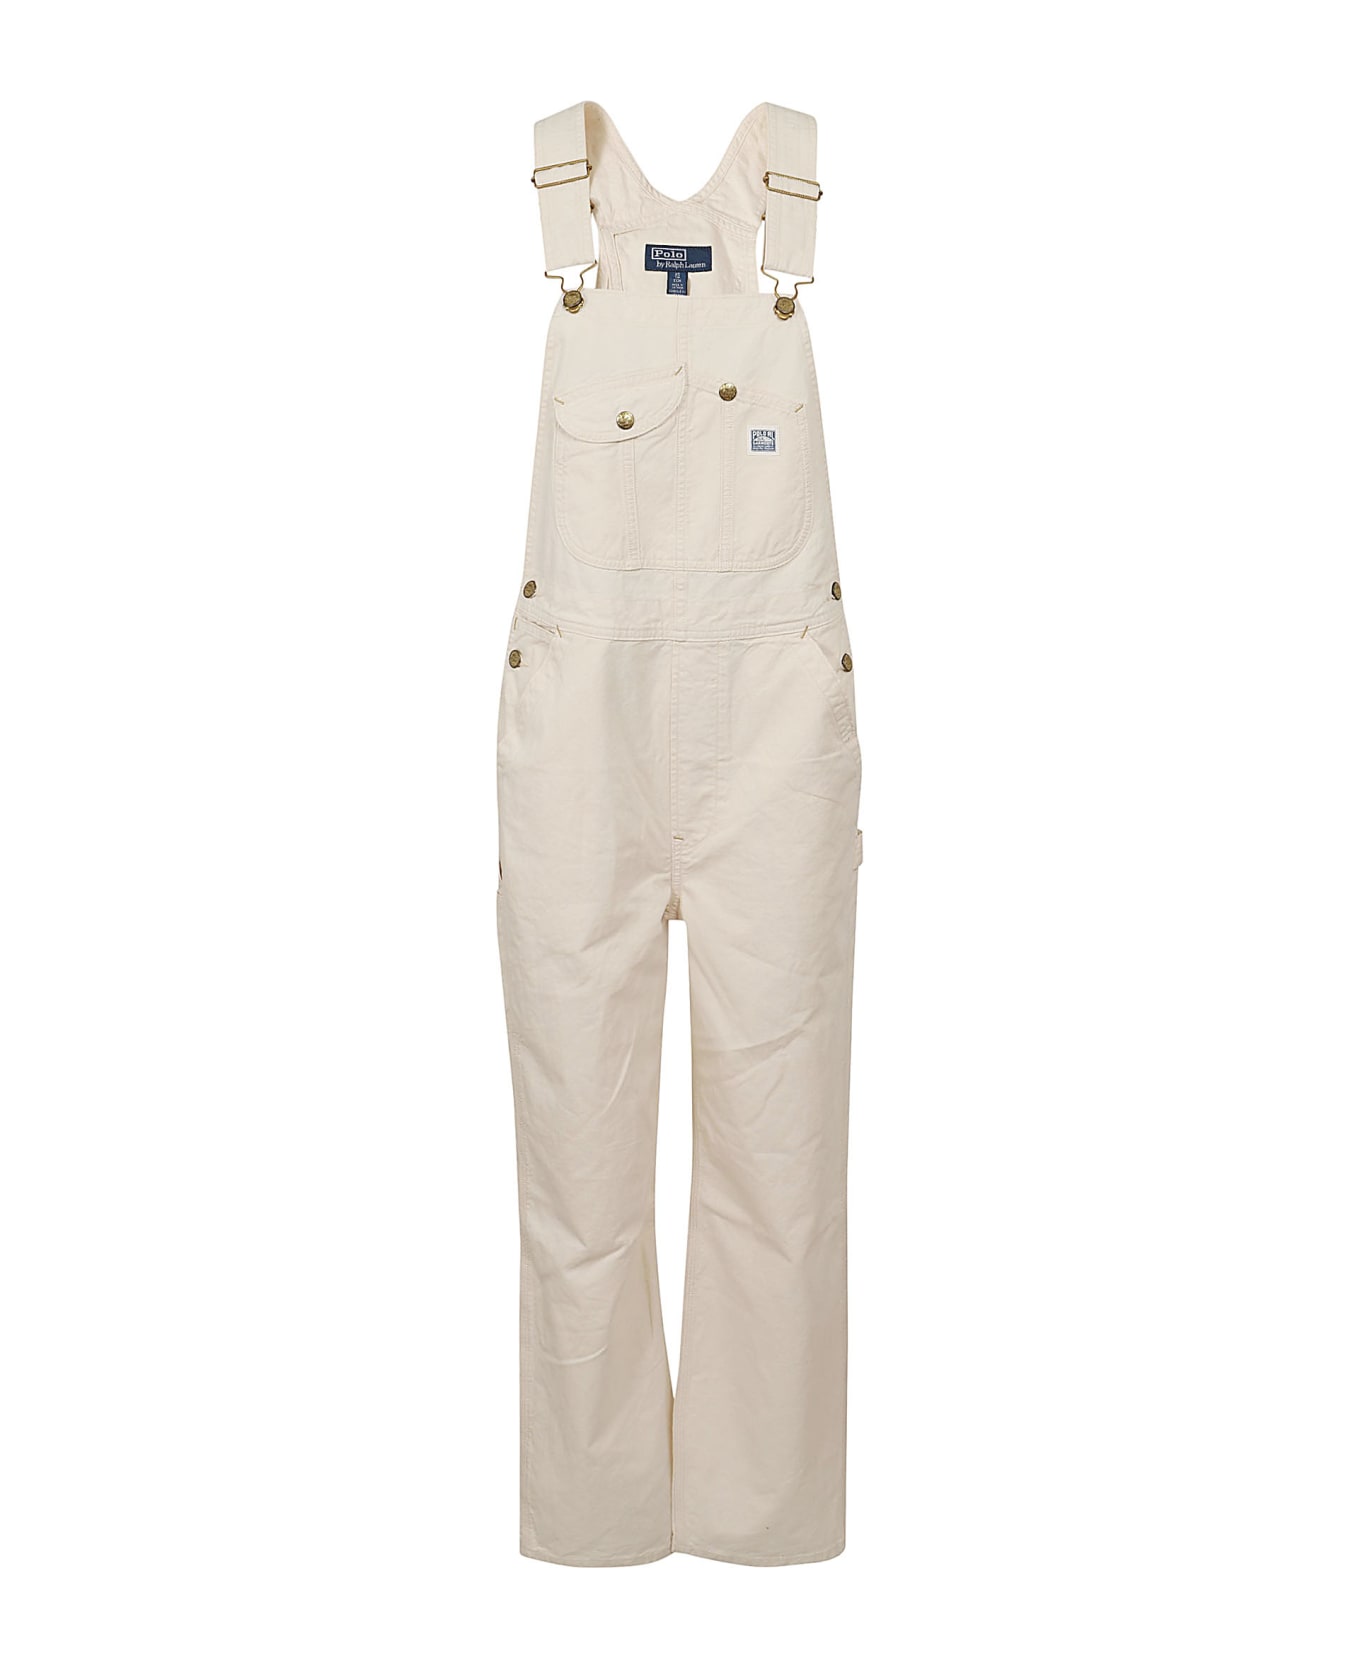 Polo Ralph Lauren Overall-overall - Drey Wash